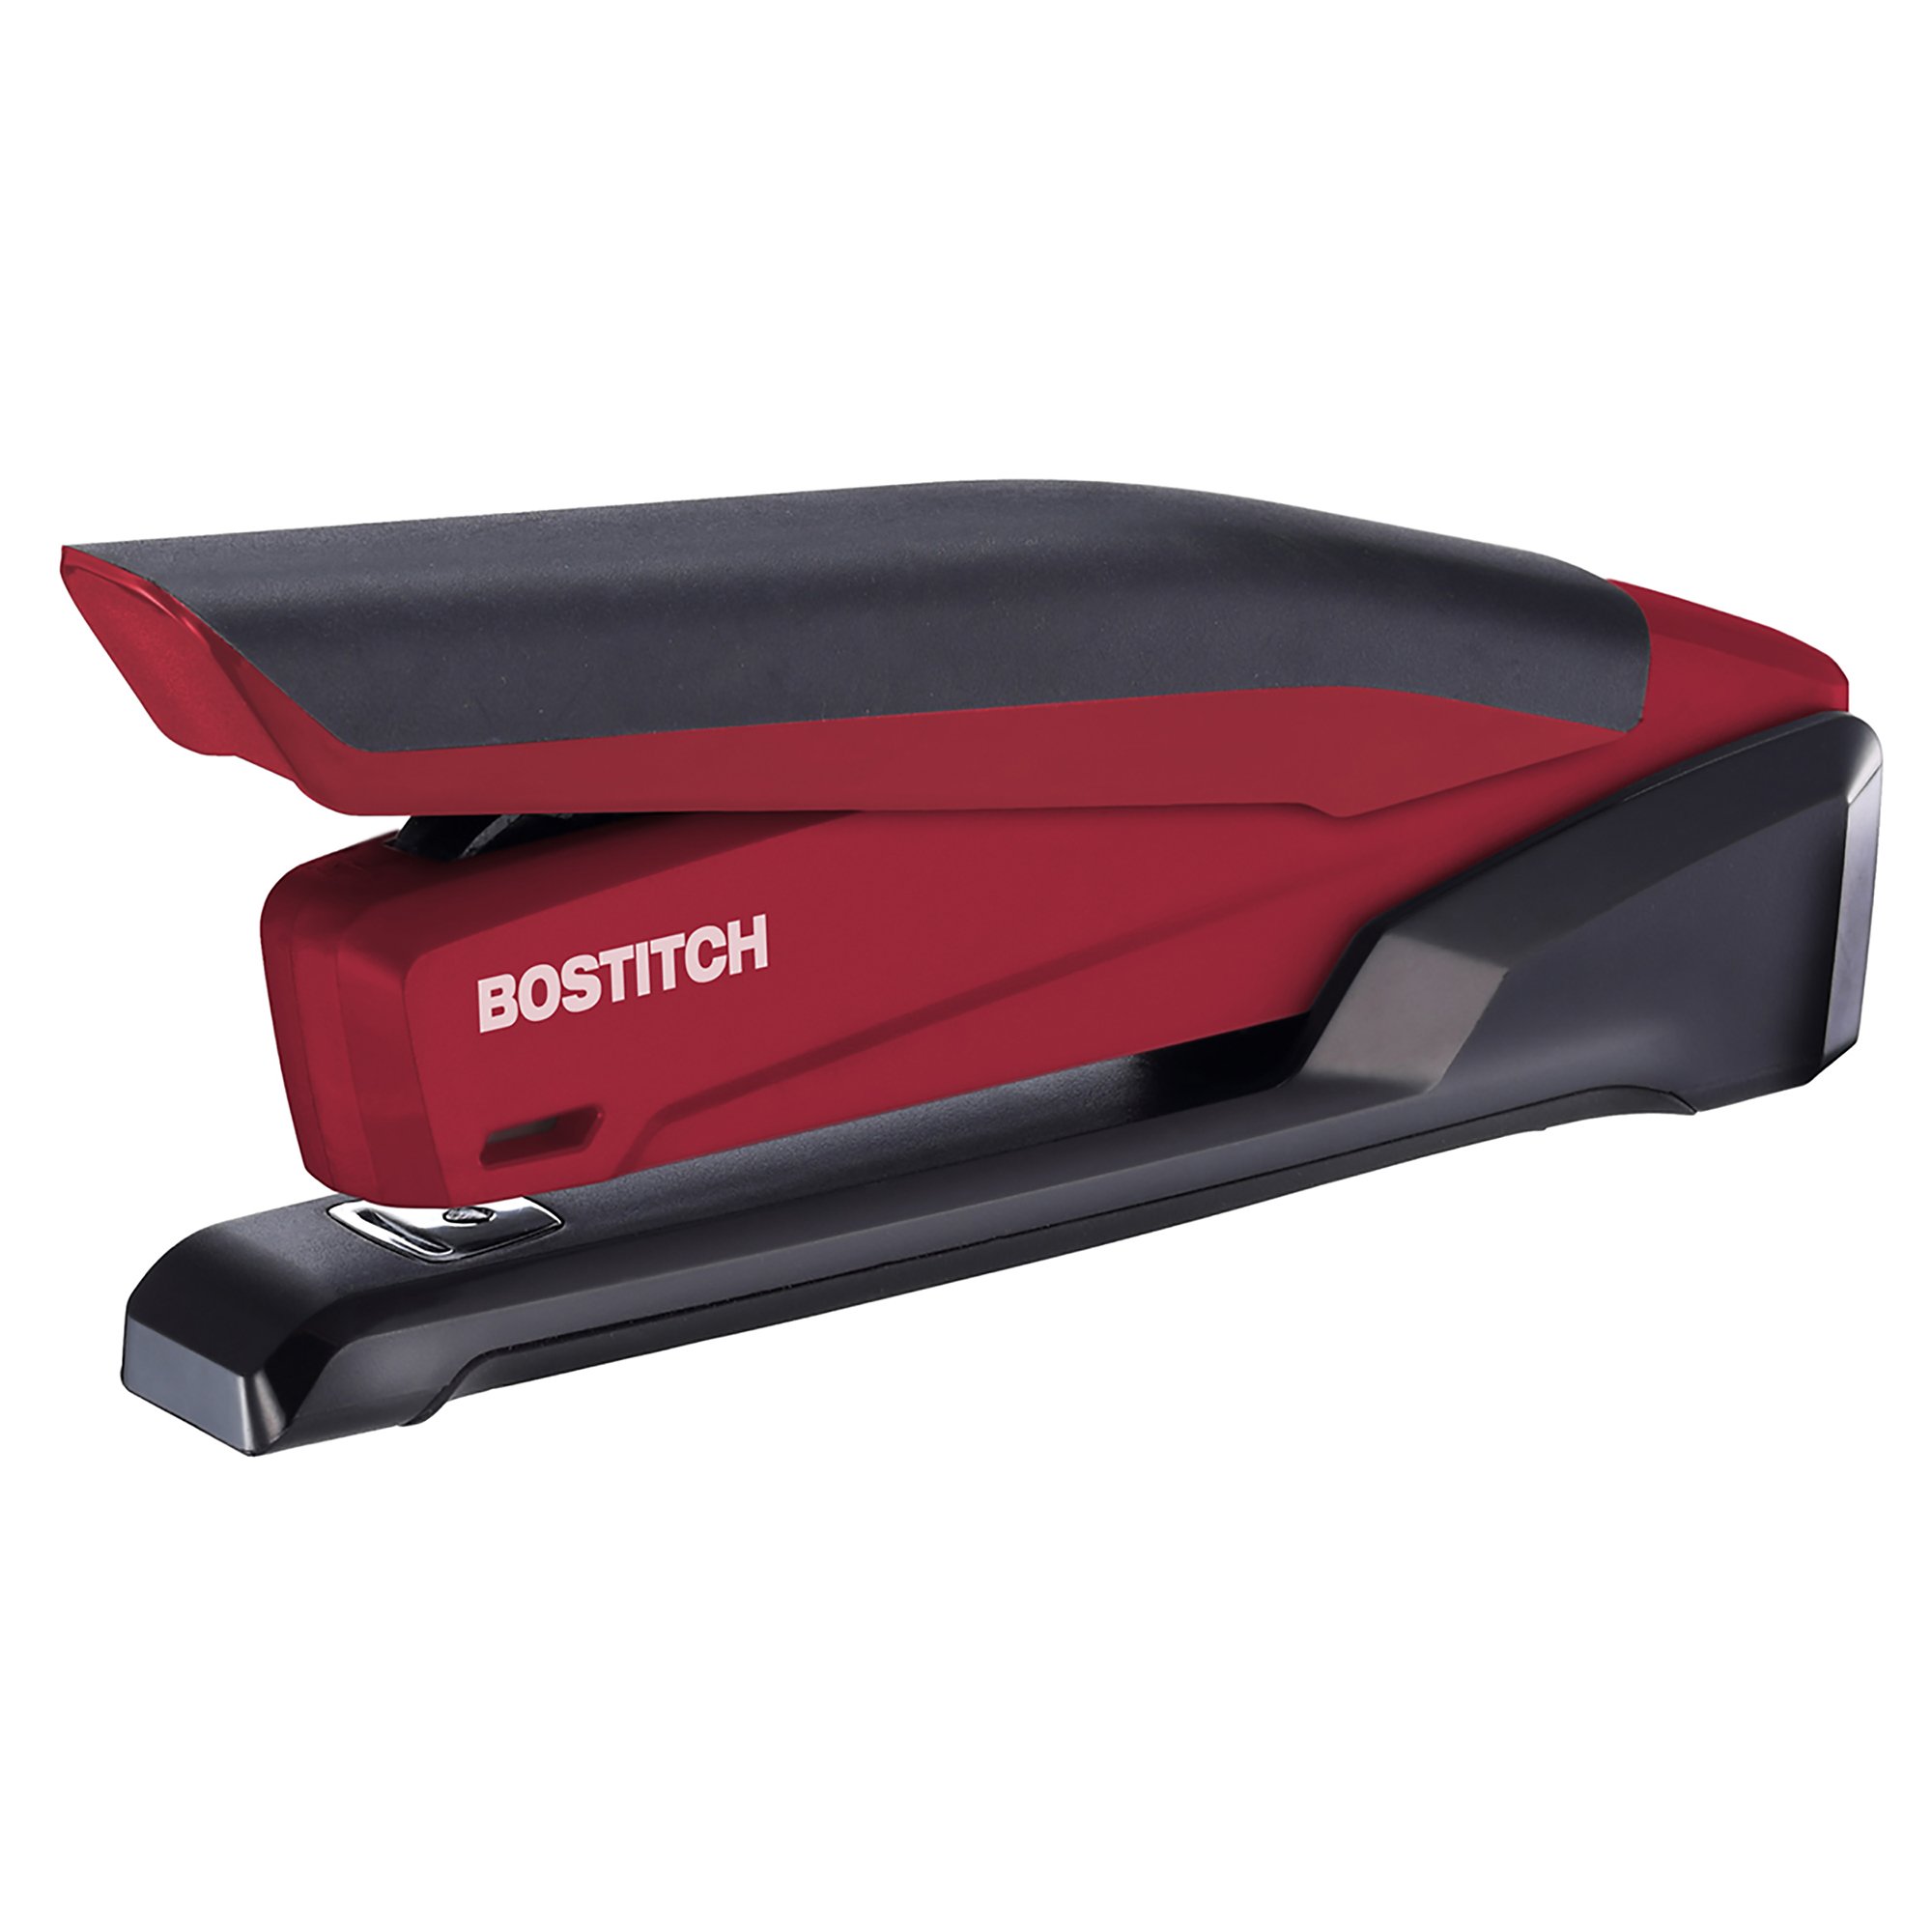 Bostitch InPOWER Stapler - Red (20 Sheet) - Click Image to Close